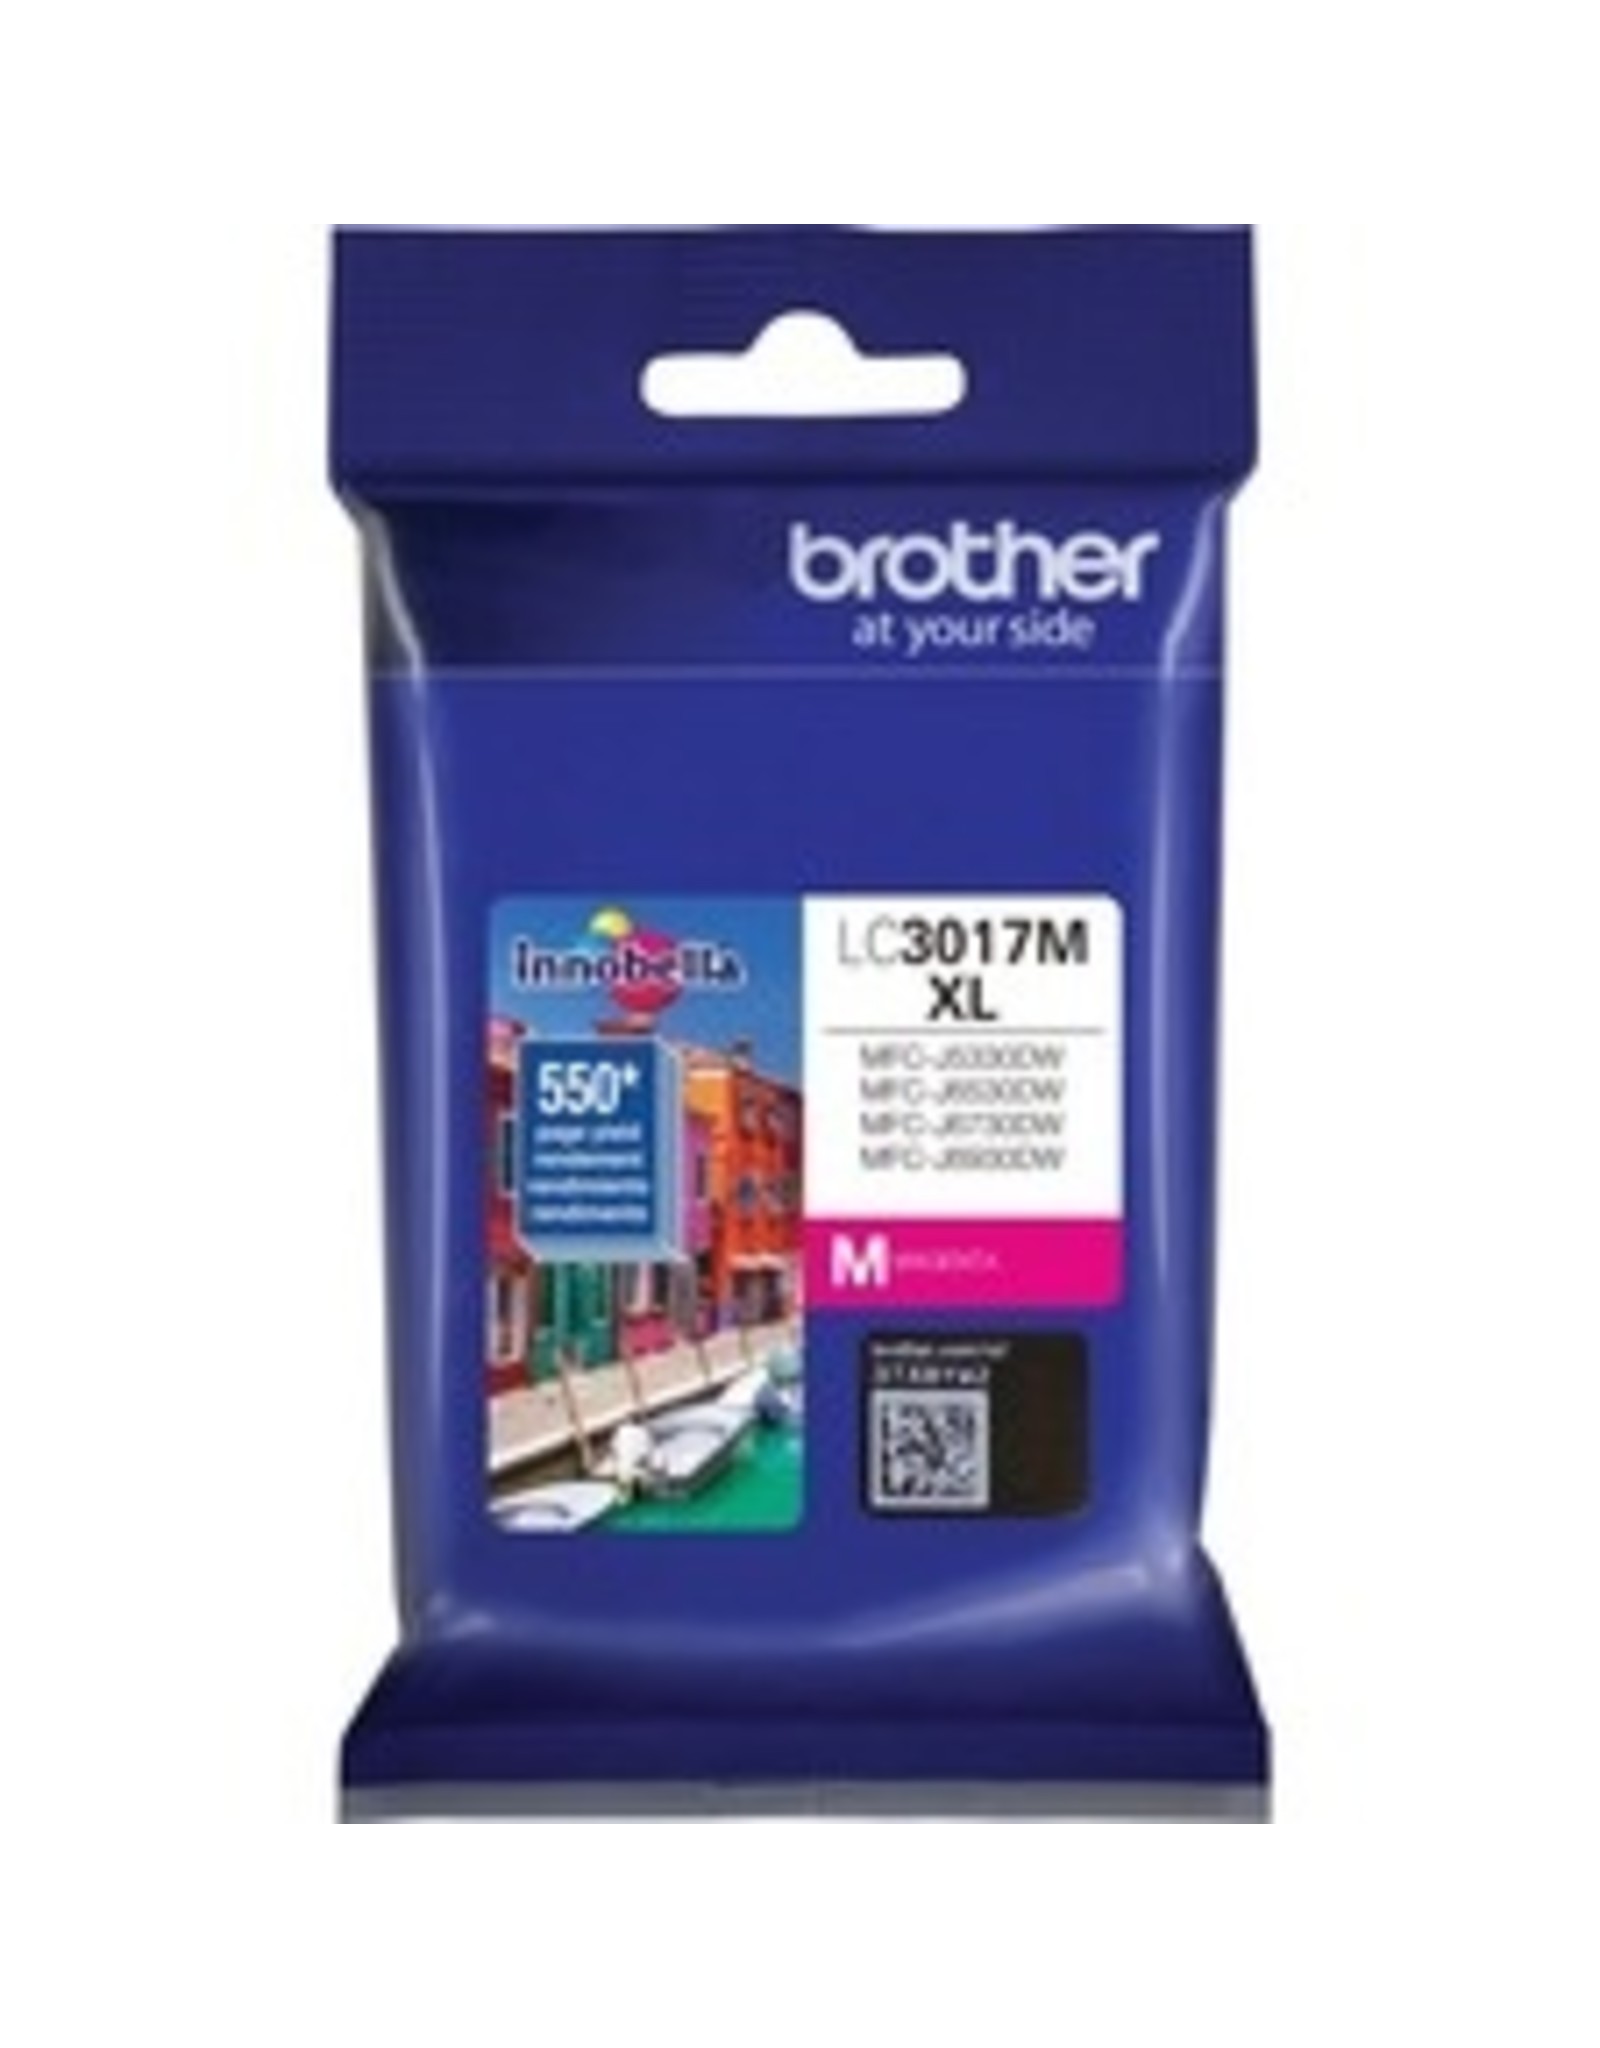 Brother Brother LC3017M XL Magenta Ink Cartridge